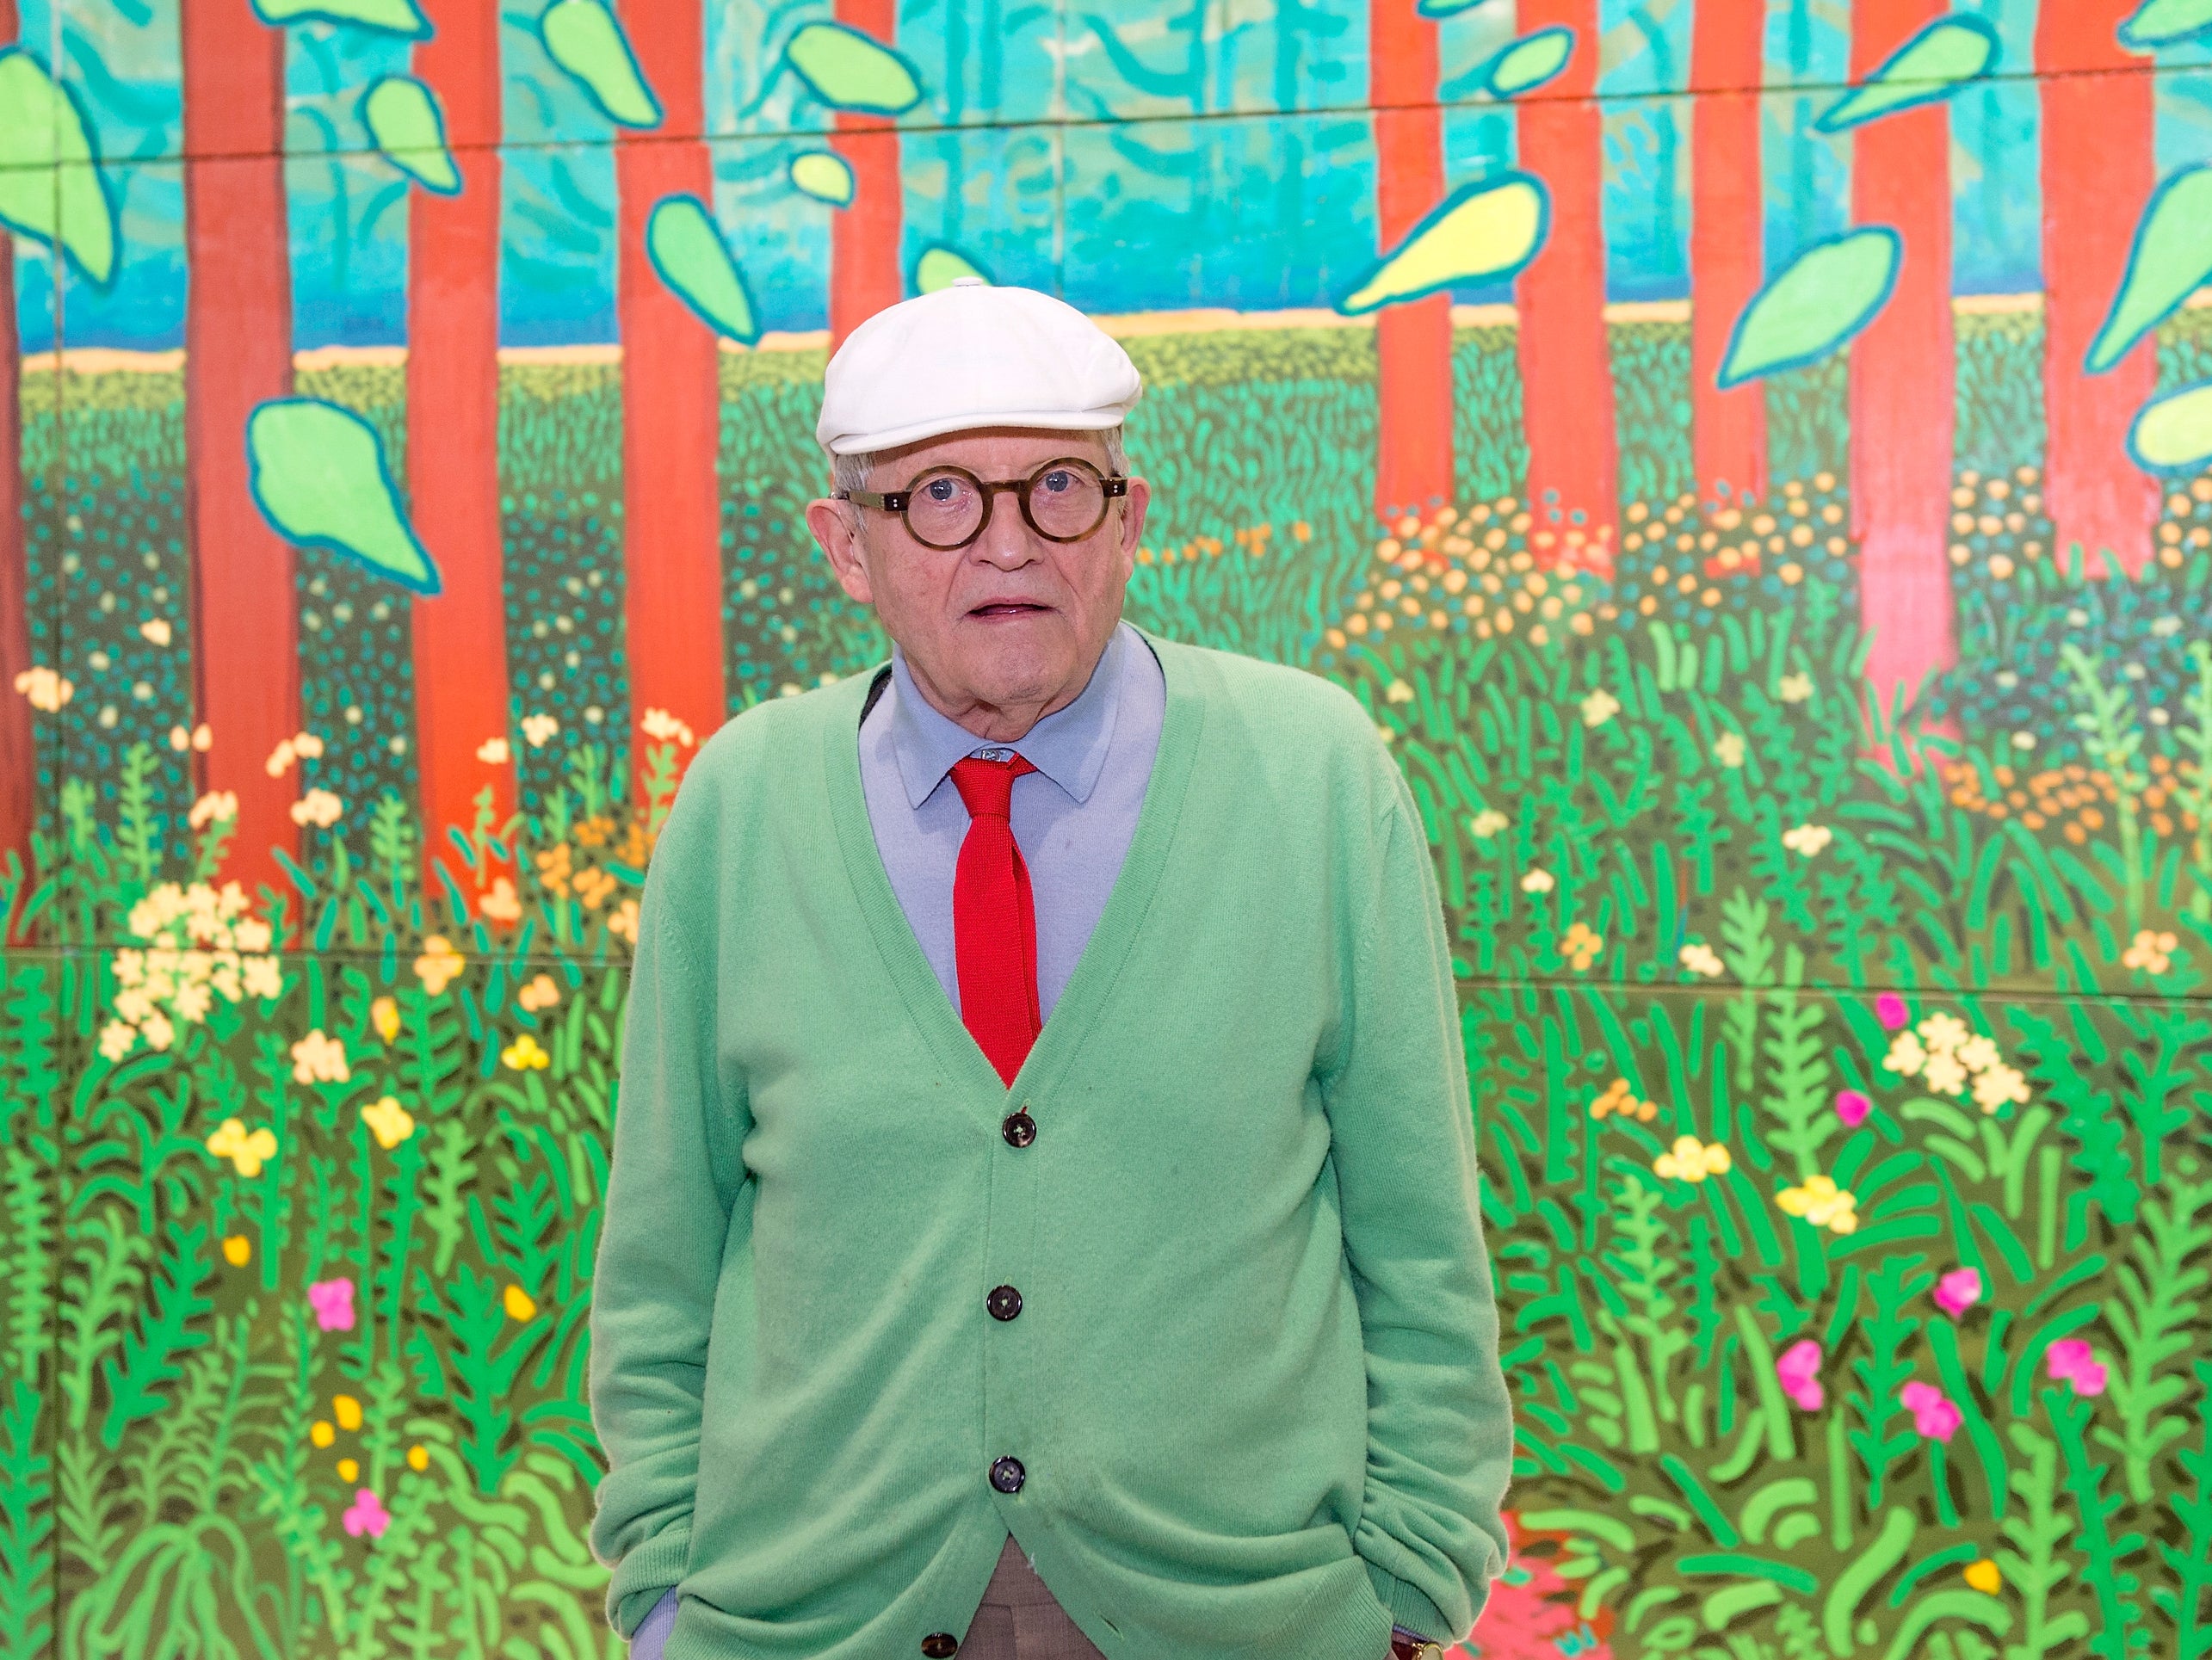 David Hockney is known for his dapper suits and love of bright colours